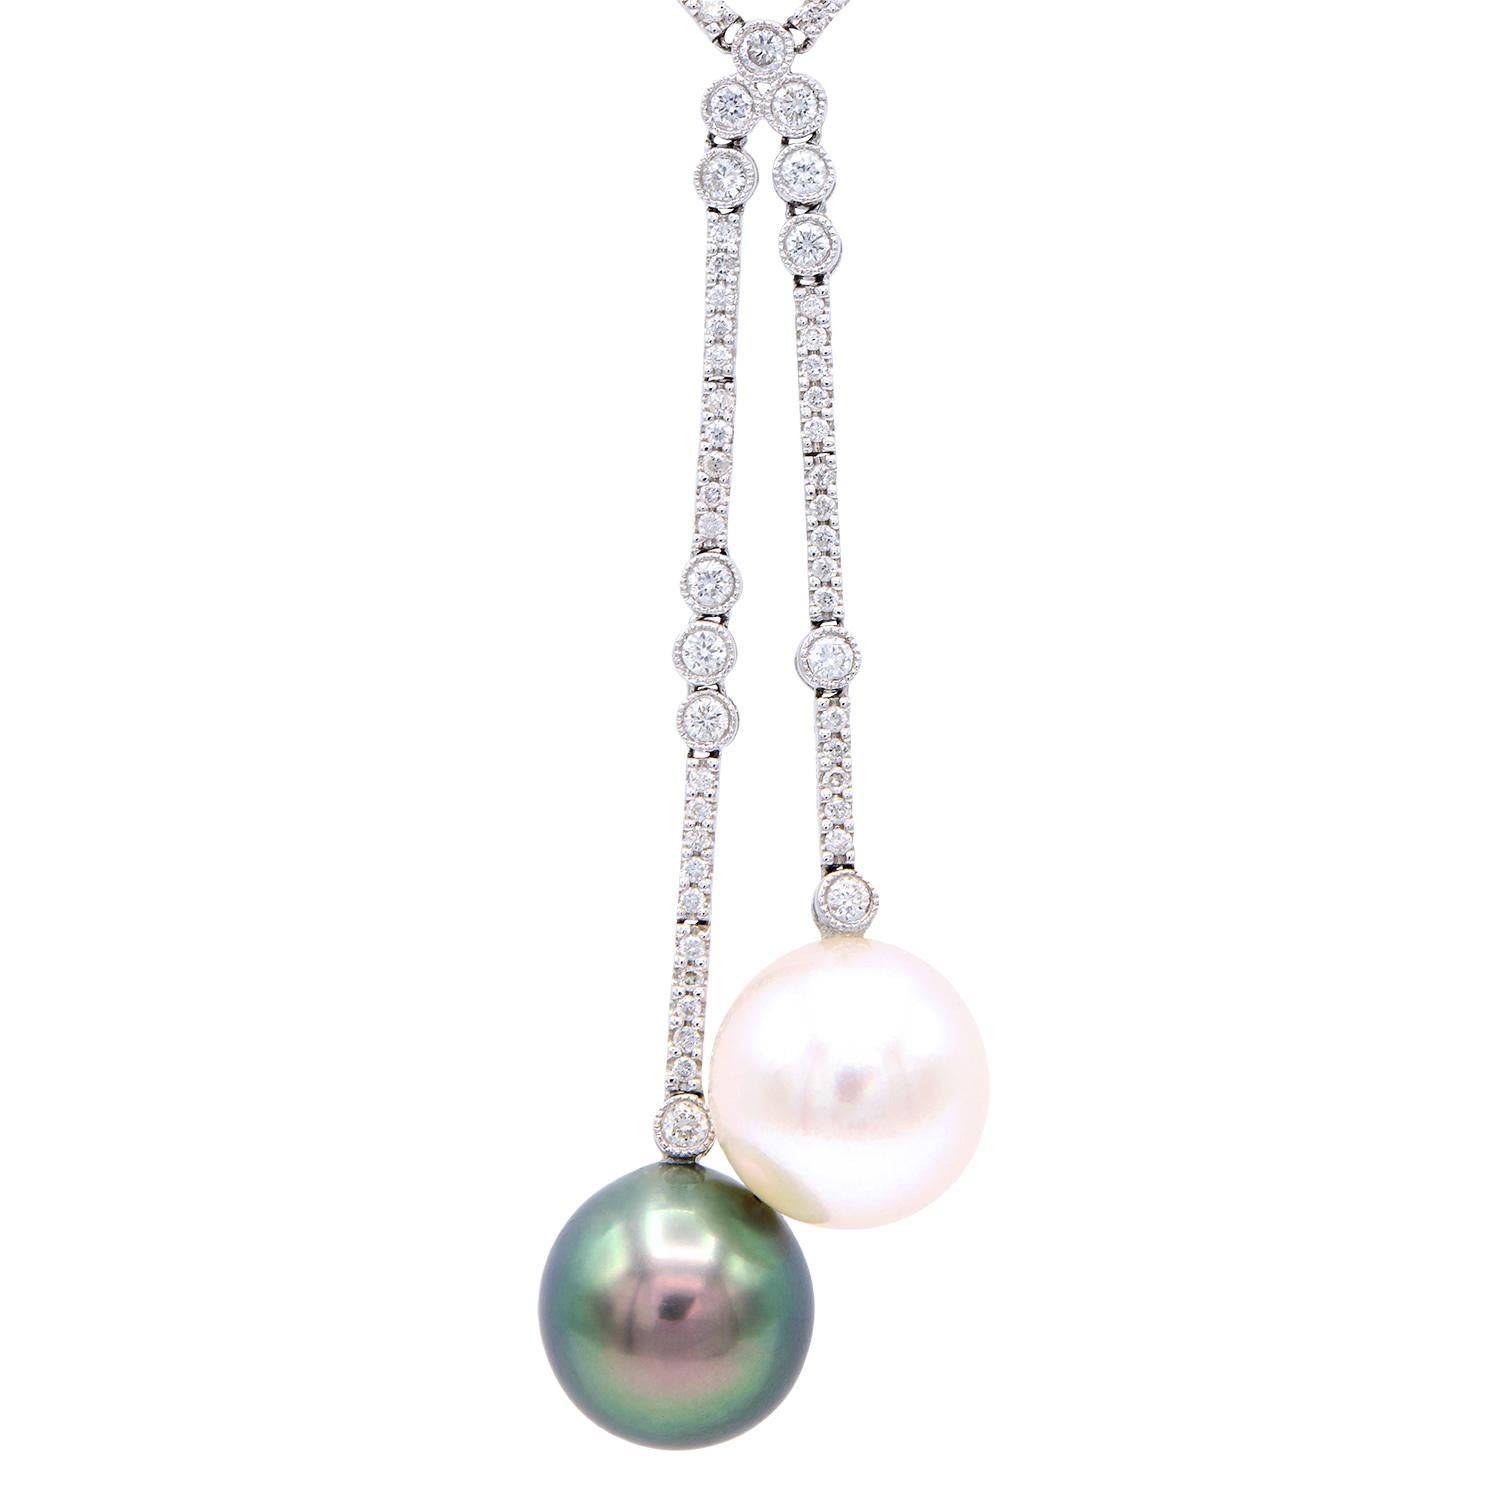 This gorgeous diamond necklace contains 115 SI1/2 H/I color diamonds totaling 0.98 carats which are mounted in 7.5 grams of 18 karat white gold. The finishing touches to this beautiful necklace are the two 11-12 mm south sea and Tahitian pearls